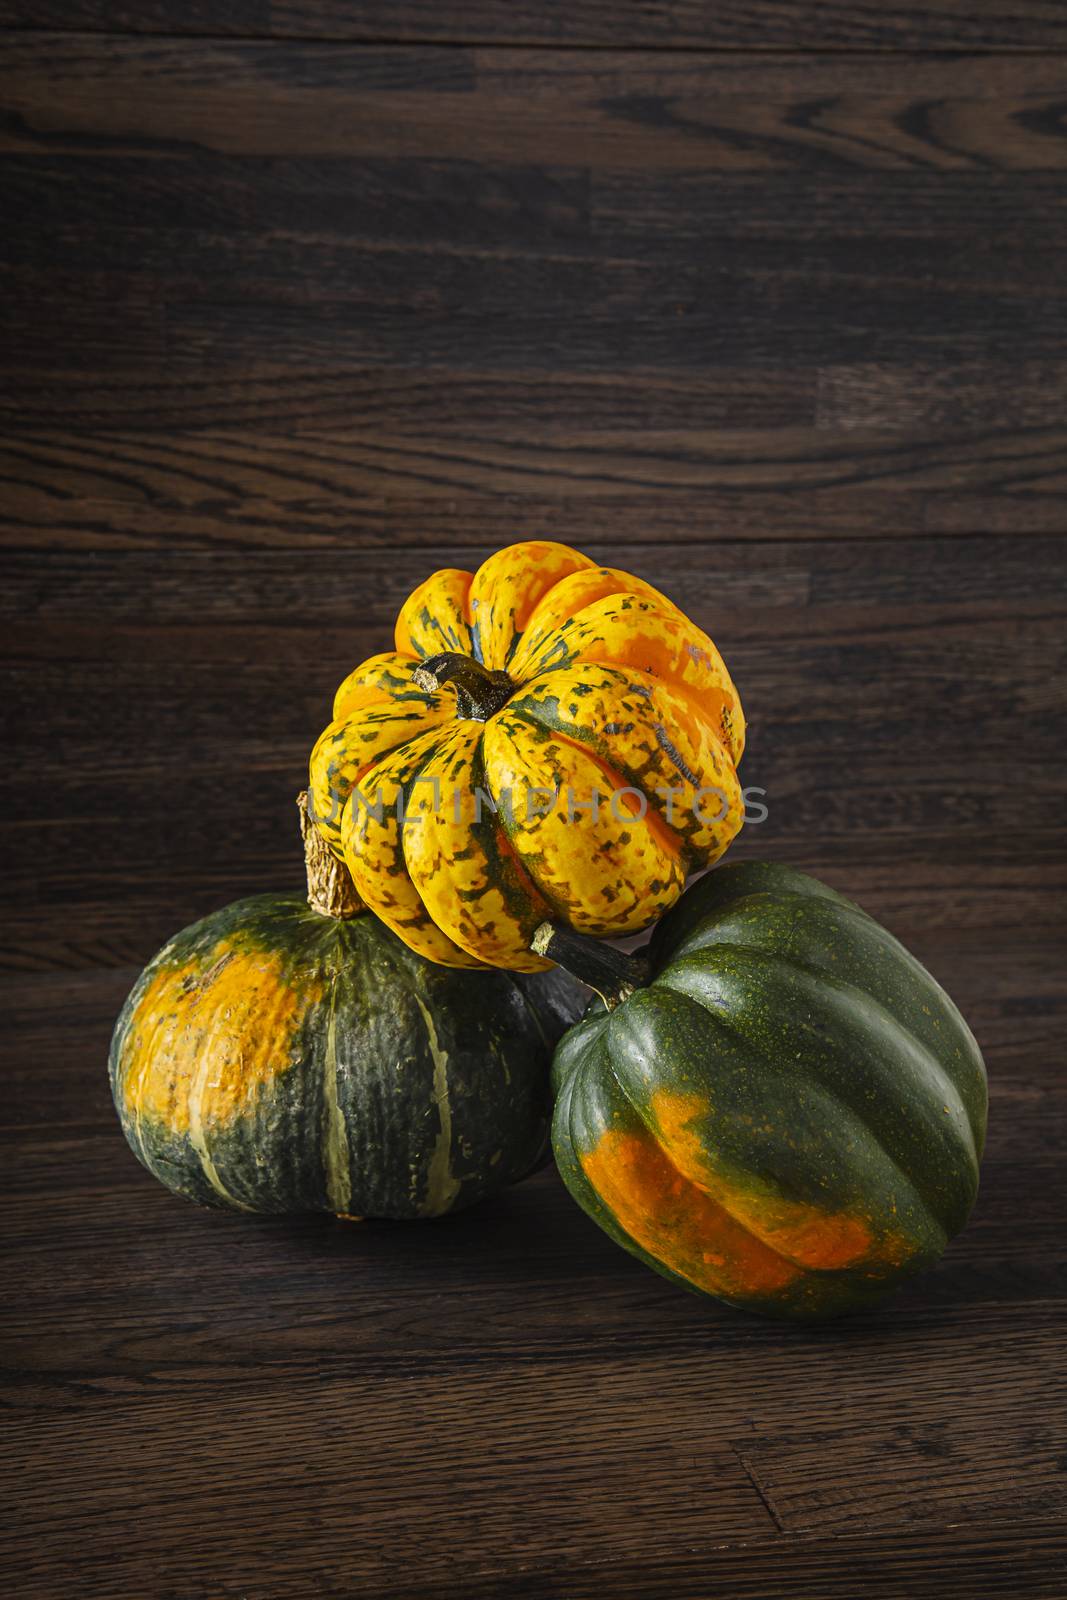 two Sweet Dumpling squash and one Kabocha squash in a stack against a wood background